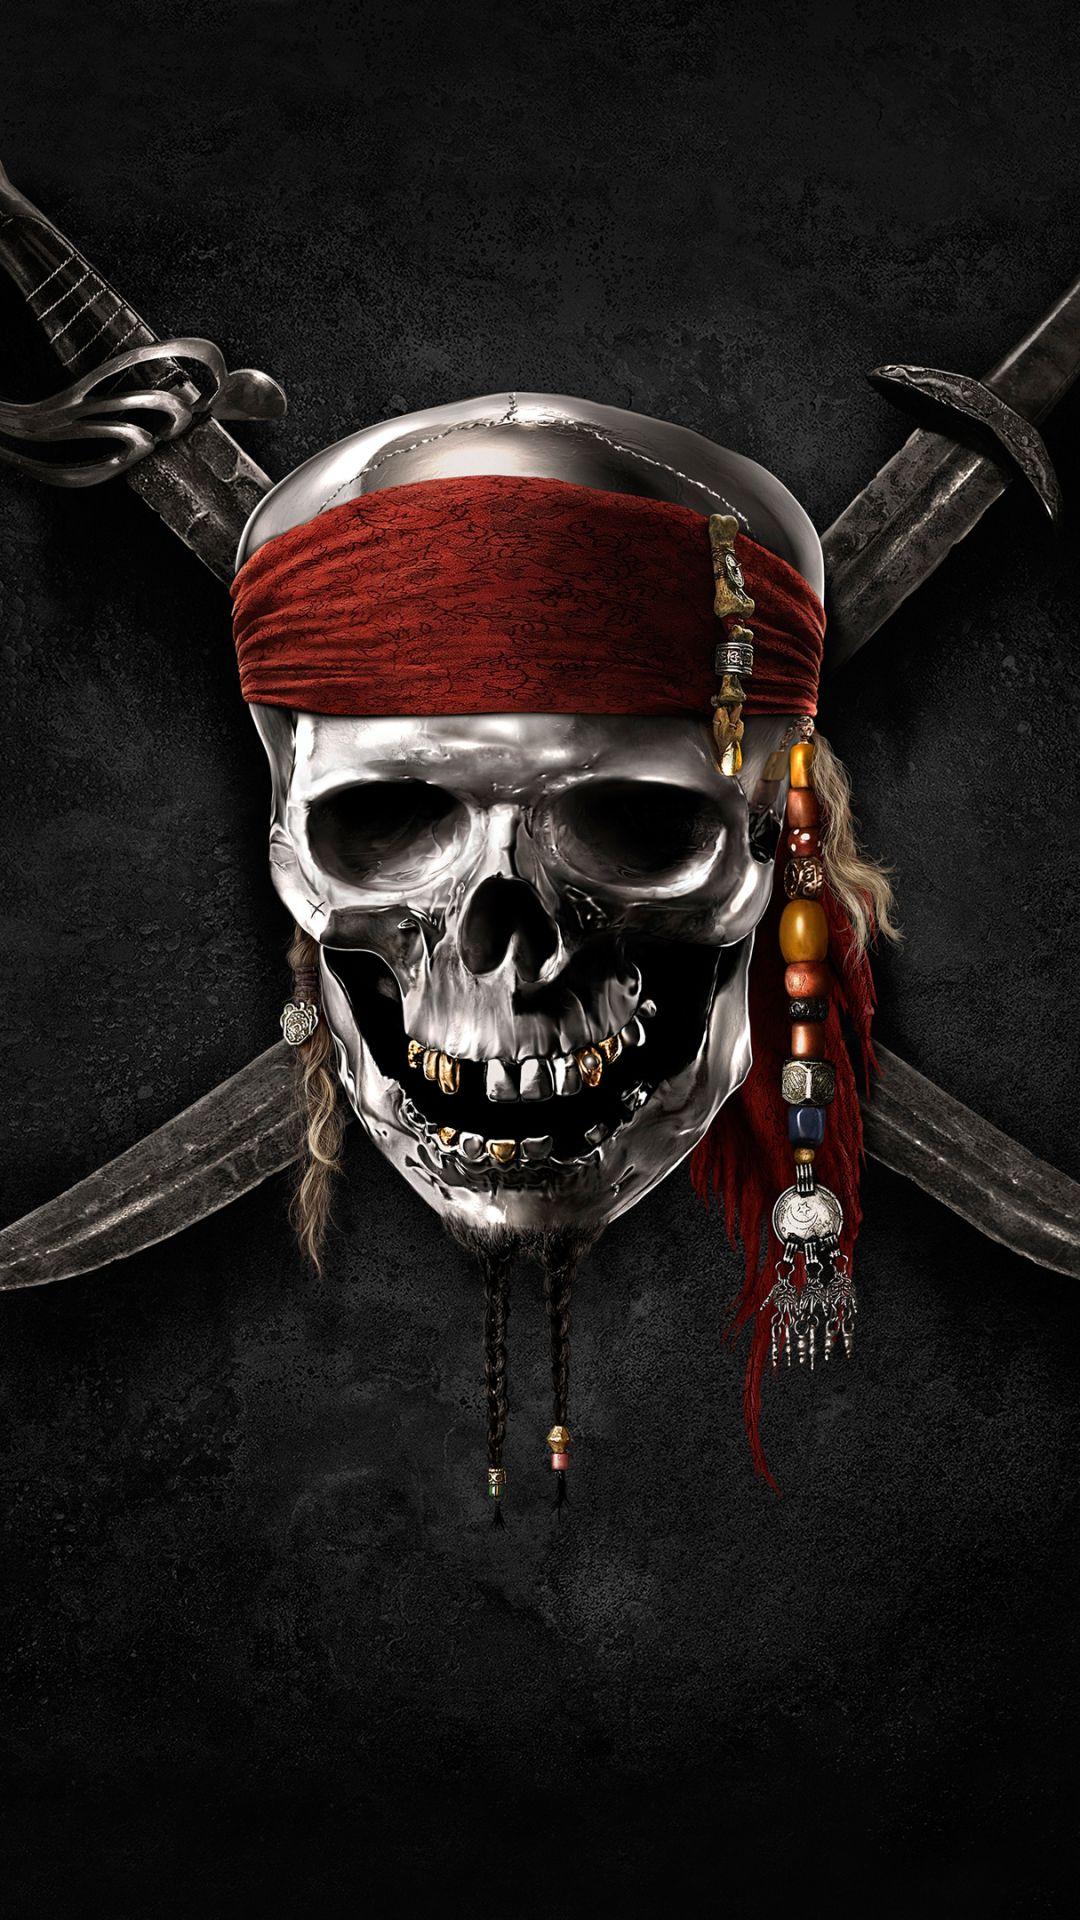 download the new for apple Pirates of the Caribbean: On Stranger